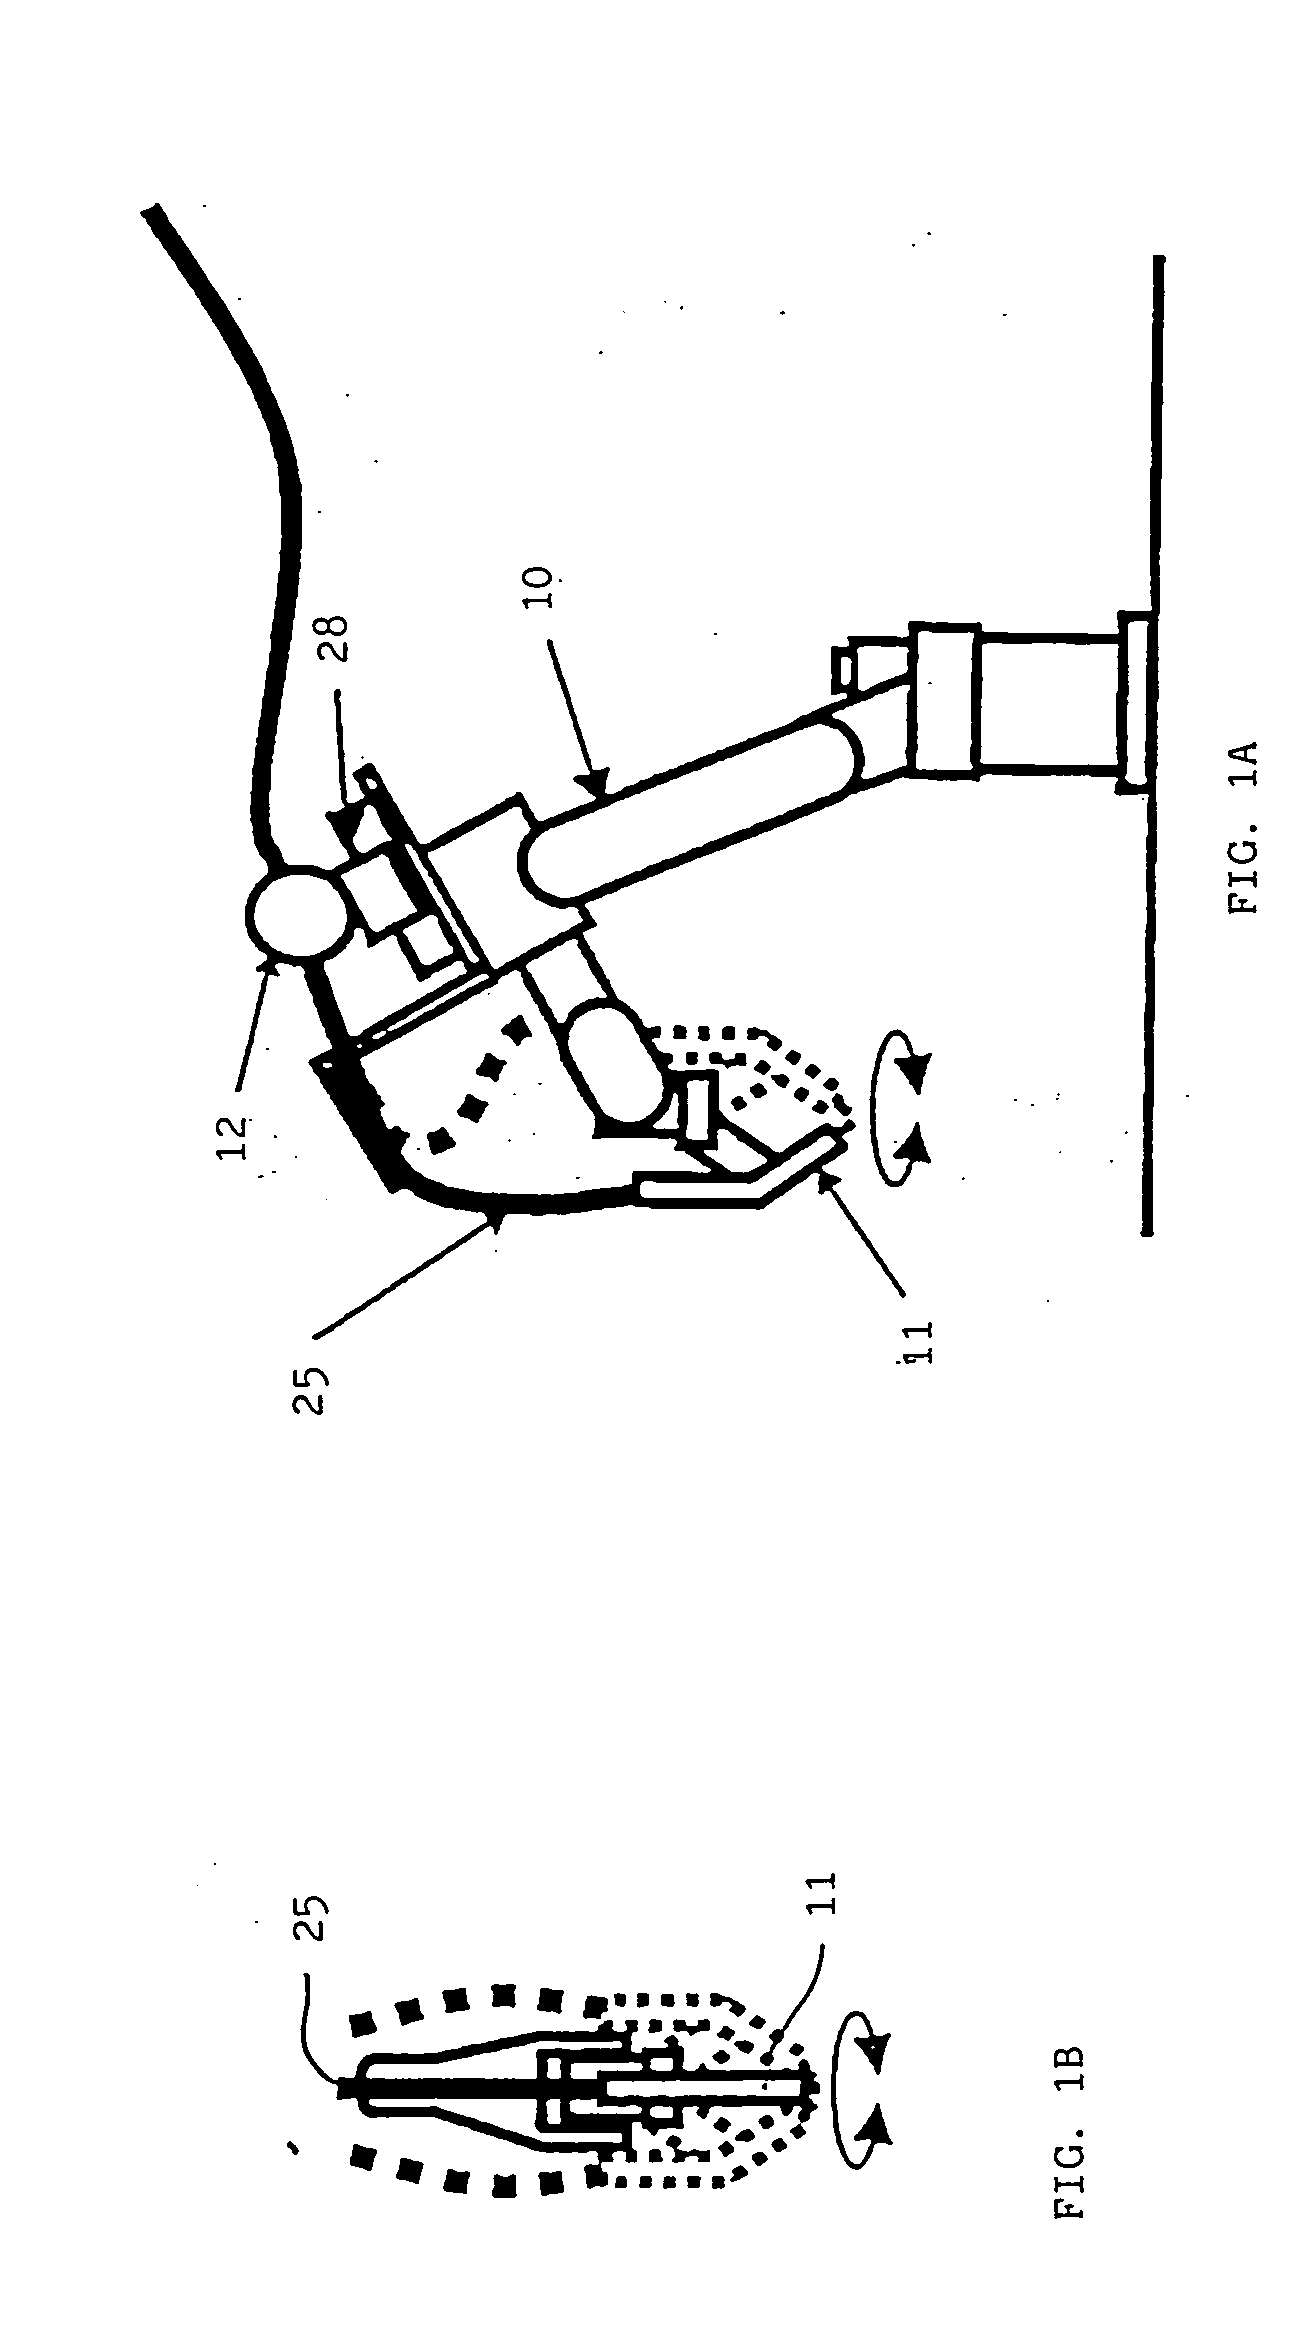 Torch cale accommodating structure of arc welding robot